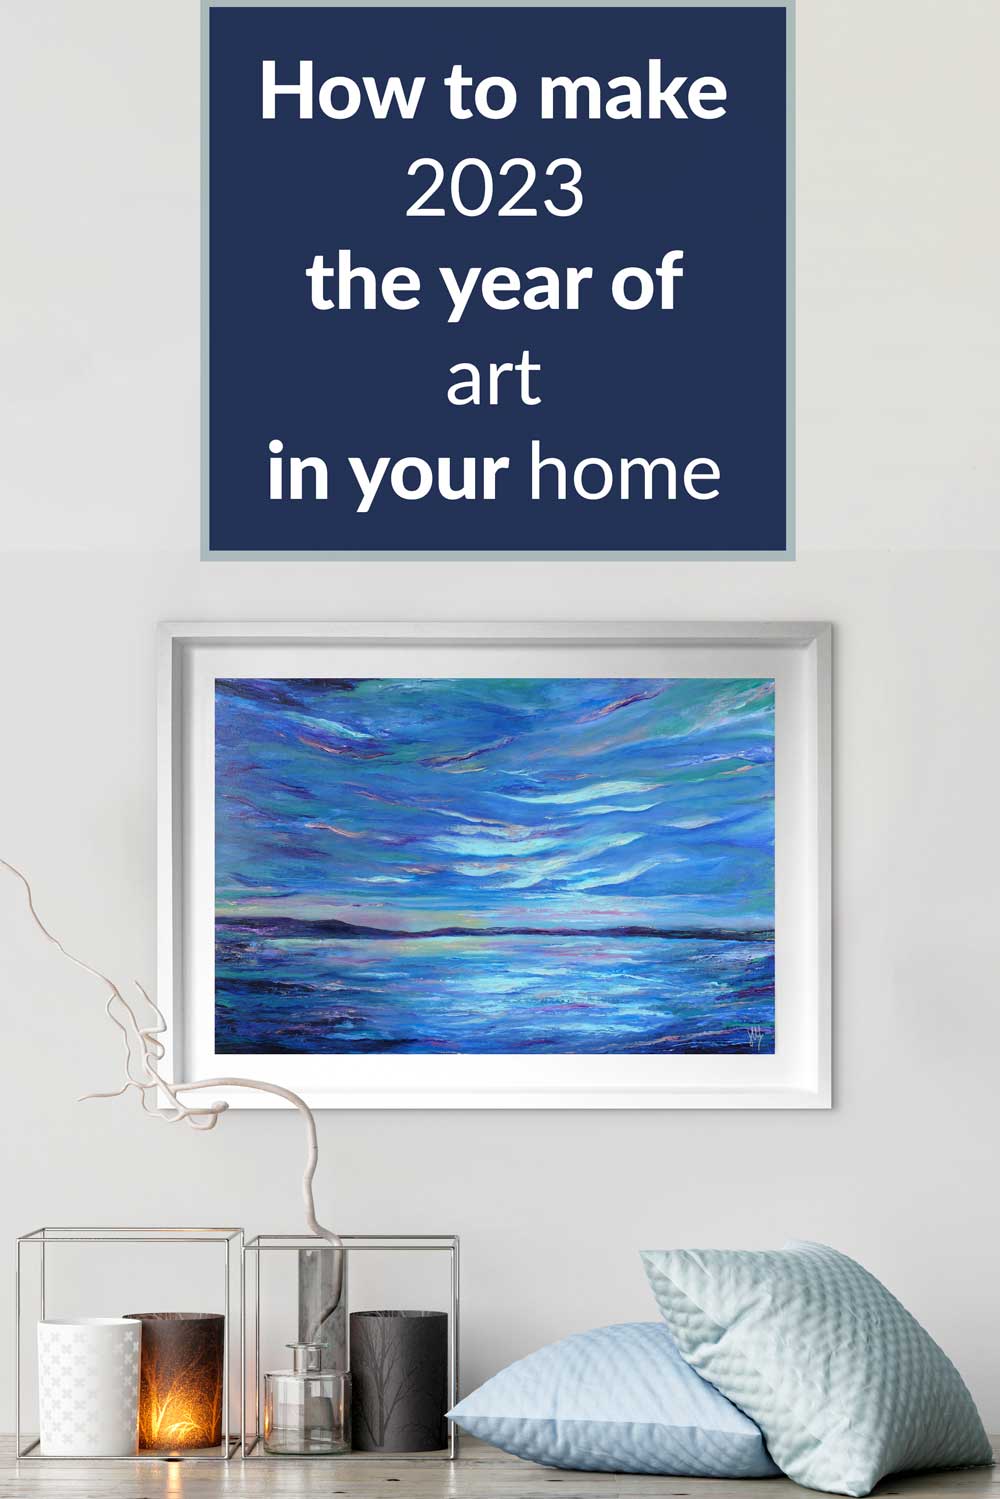 Make 2023 the year of art in your home